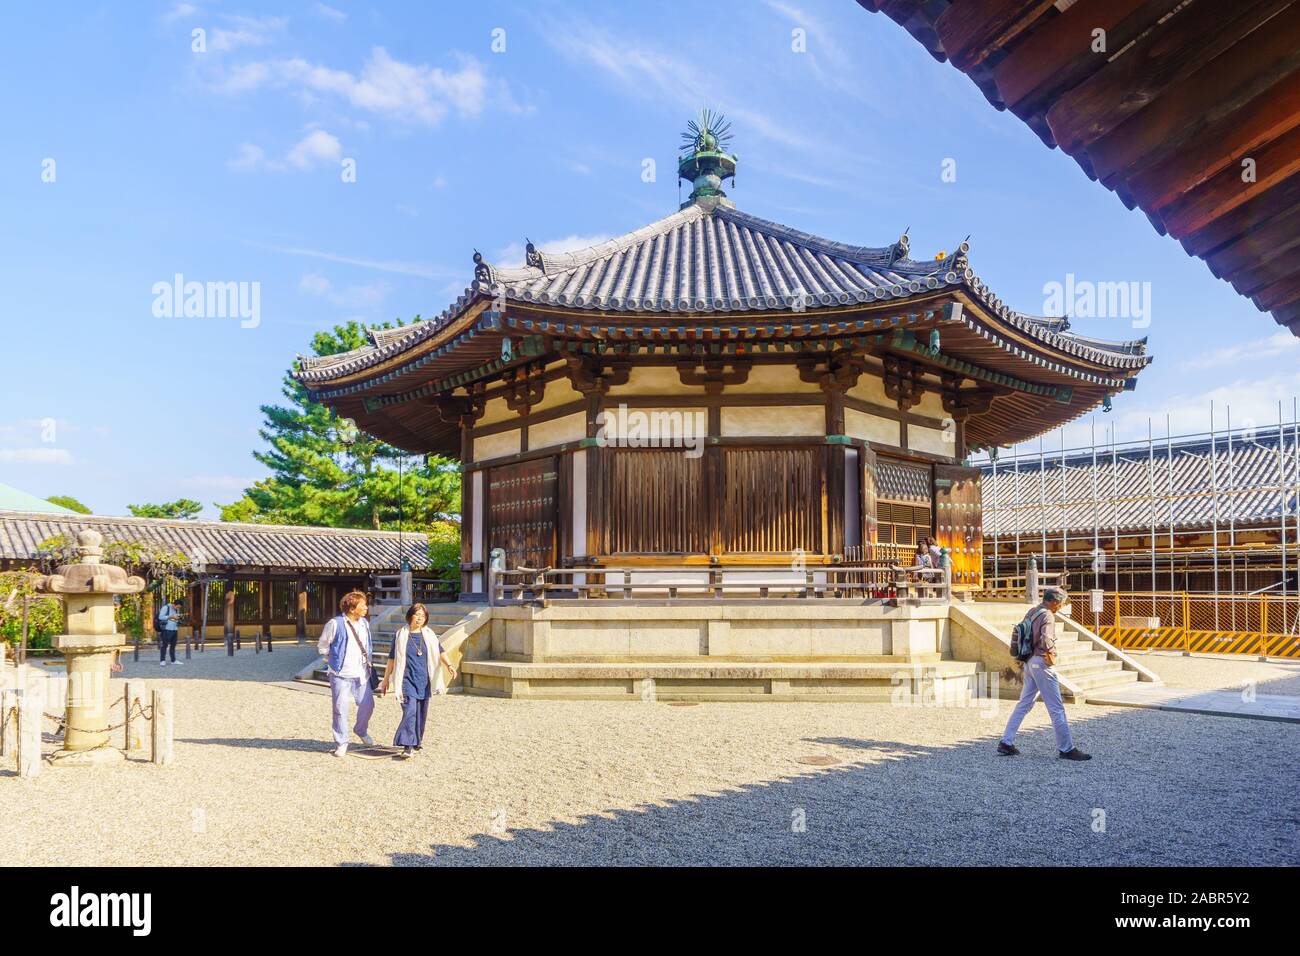 Ikaruga, Japan - October 5, 2019: View of the Horyu-ji compound and Yumedono, with visitors, it is a Buddhist temple in Ikaruga, Nara prefecture, Japa Stock Photo